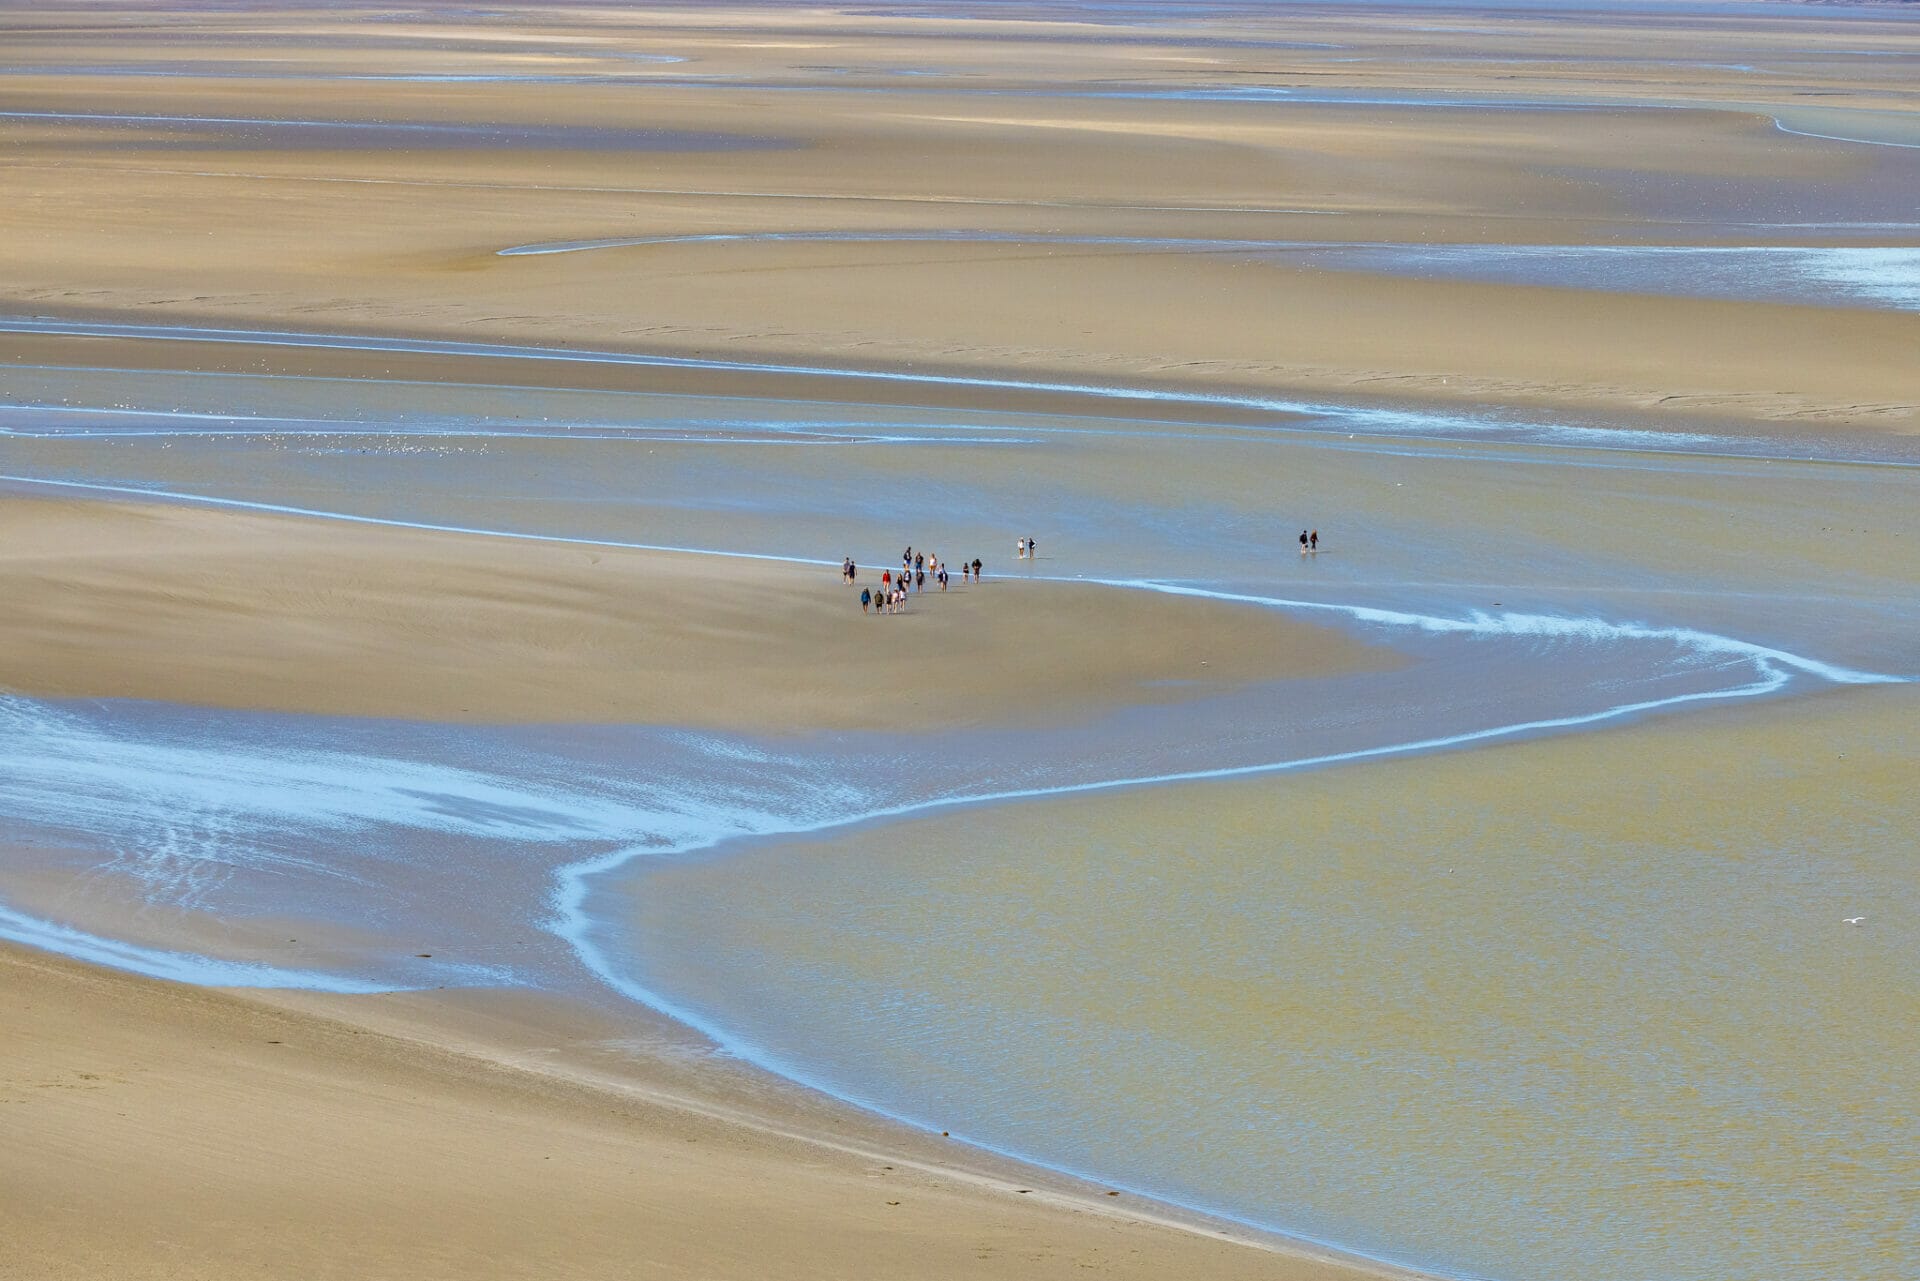 People on a guided tour crossing the sandy tidal flats at Mont Saint-Michel